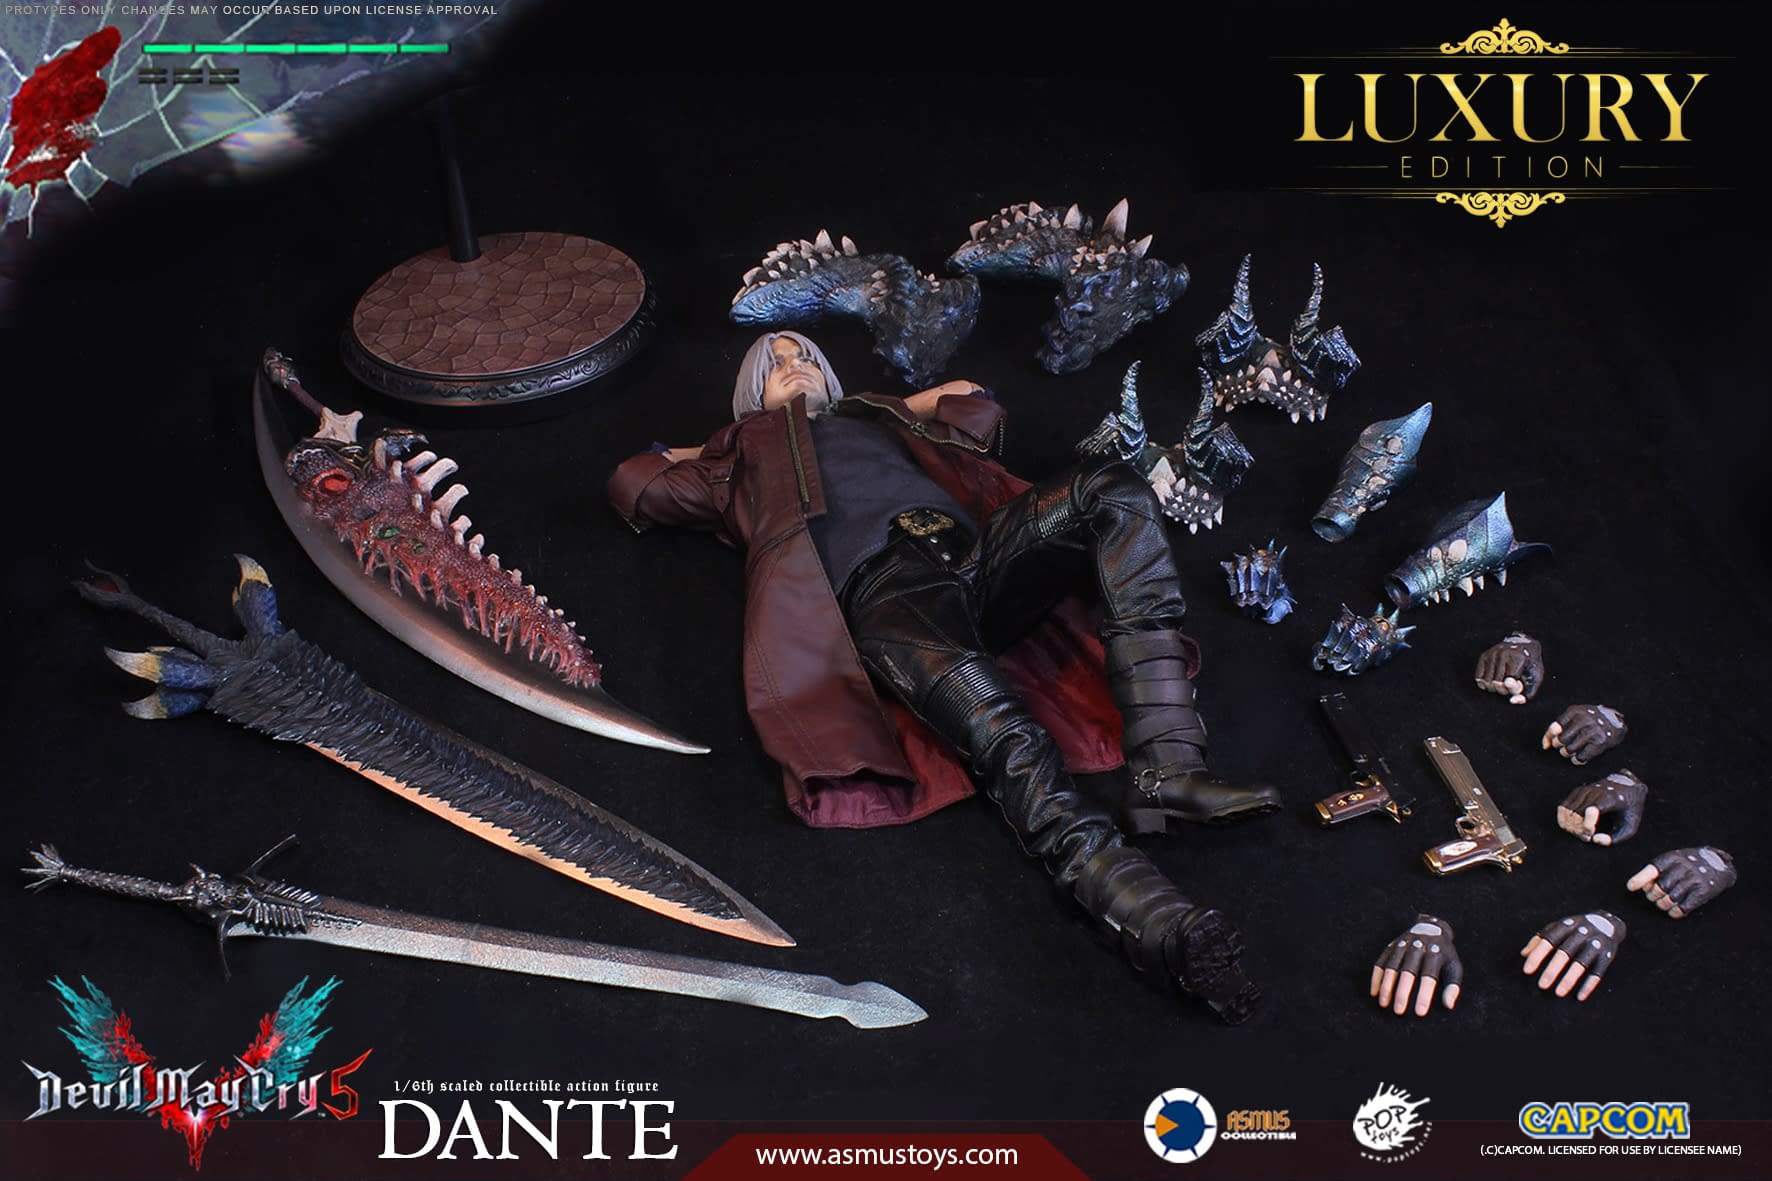 Devil May Cry V Dante Is Ready To Slay With New Asmus Toys Figure